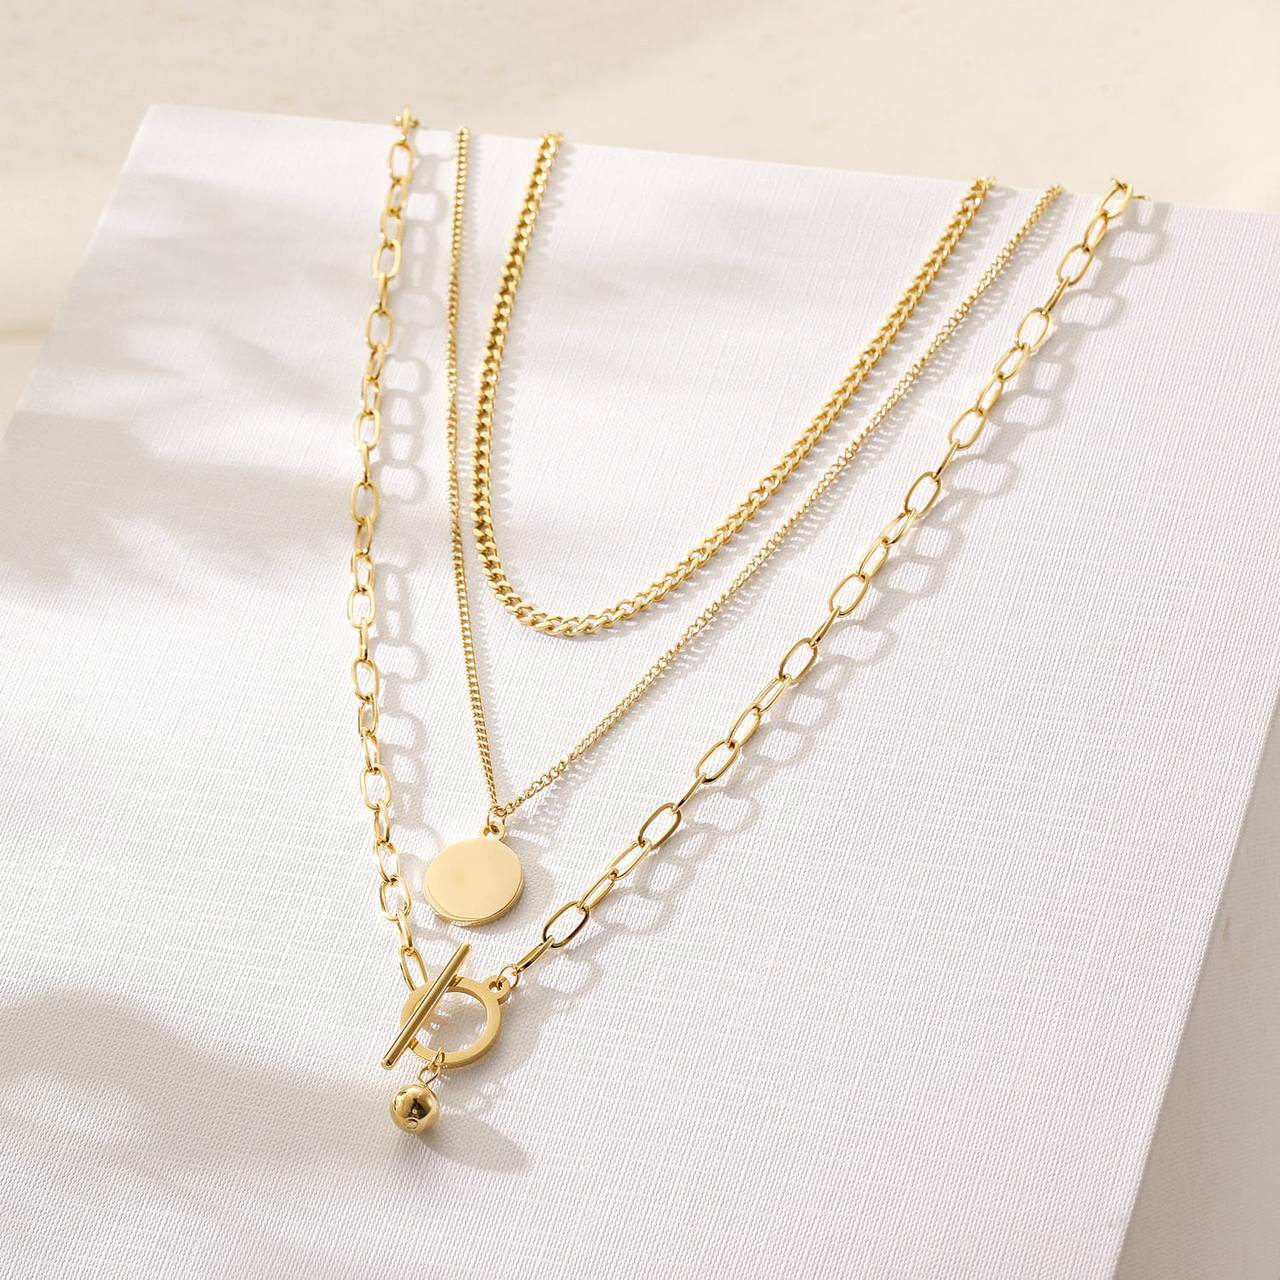 Multilayer Stainless steel necklace